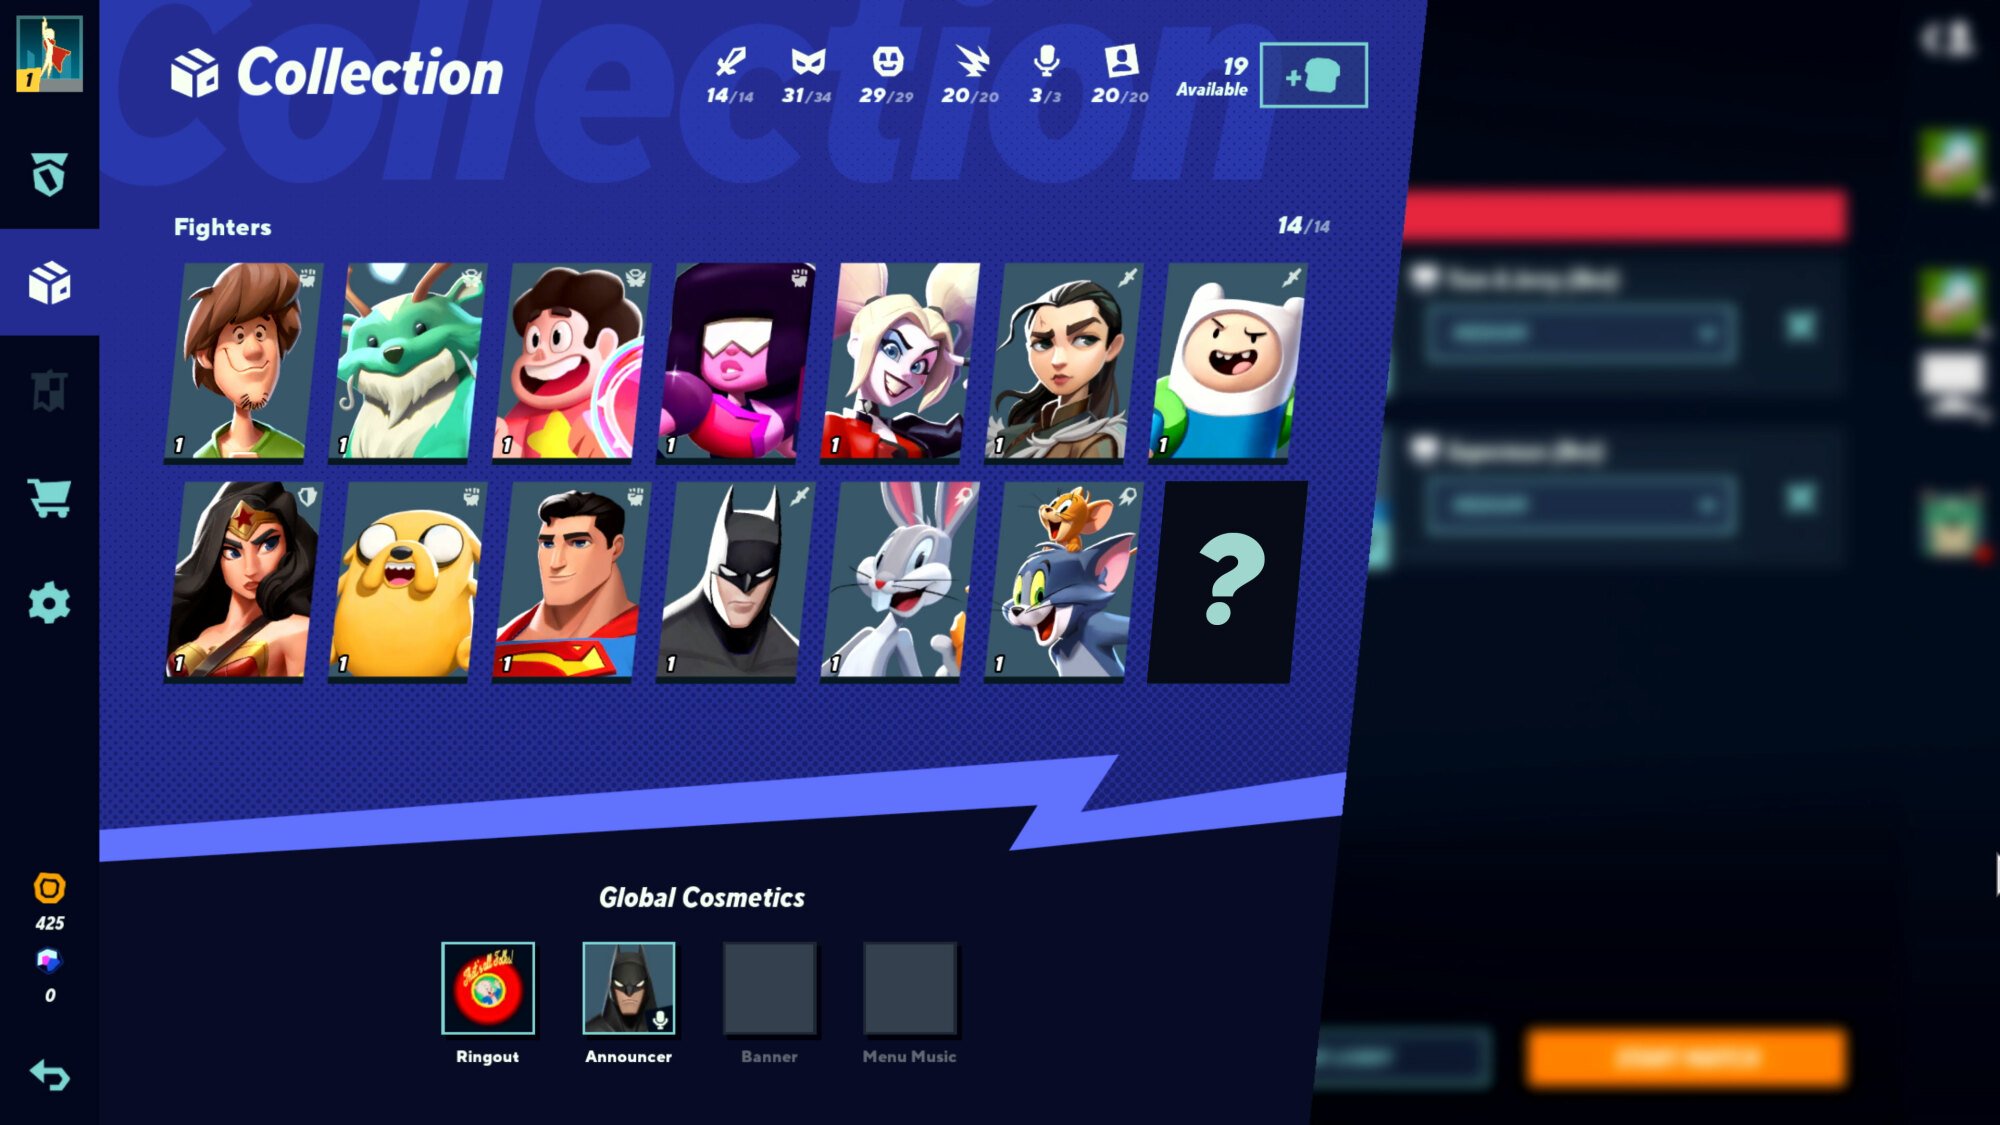 A screenshot of the character selection screen from "MultiVersus."